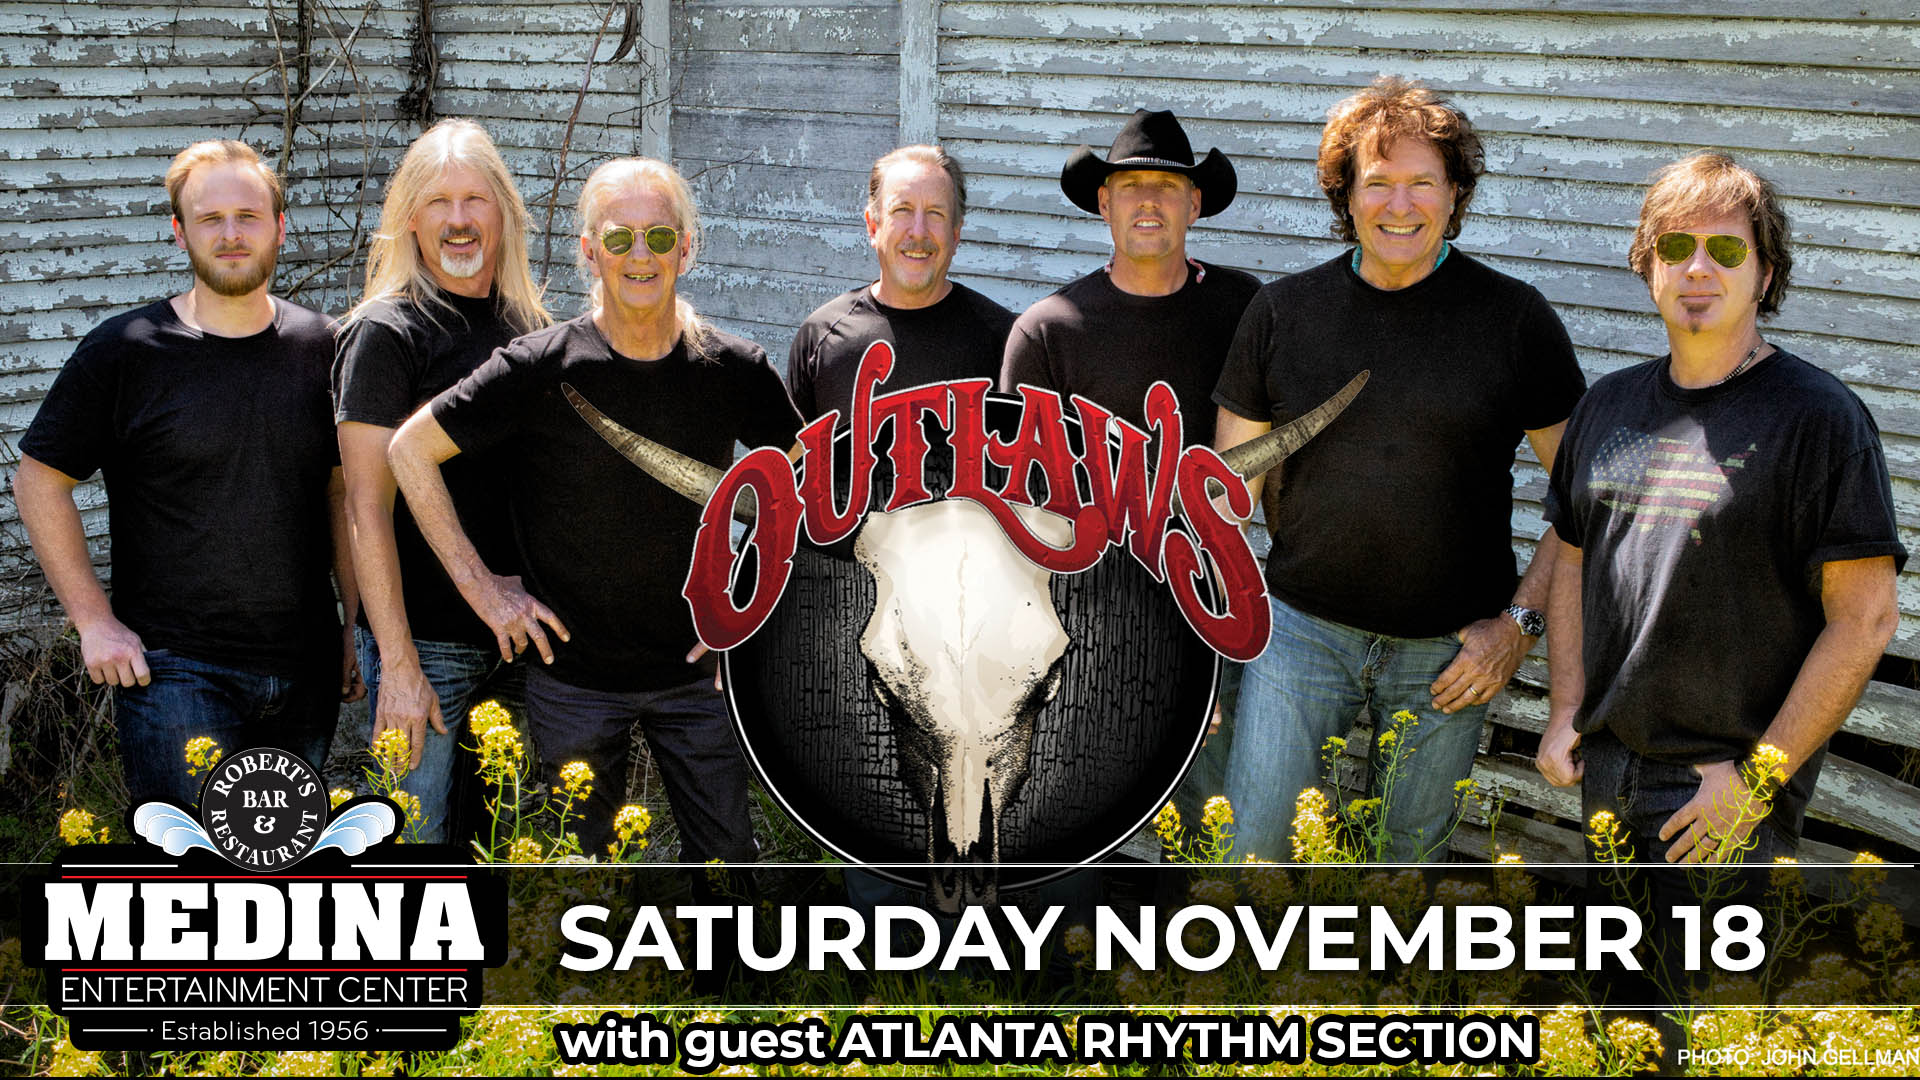 The Outlaws with guest Atlanta Rhythm Section Medina Entertainment Center Saturday, November 18th, 2023 Doors: 7:30PM | Music: 8:00PM | 21+ Tickets on-sale Friday, July 14 at 1PM General Seating $39/ Silver Reserved $47 / Gold Reserved $50 plus applicable fees